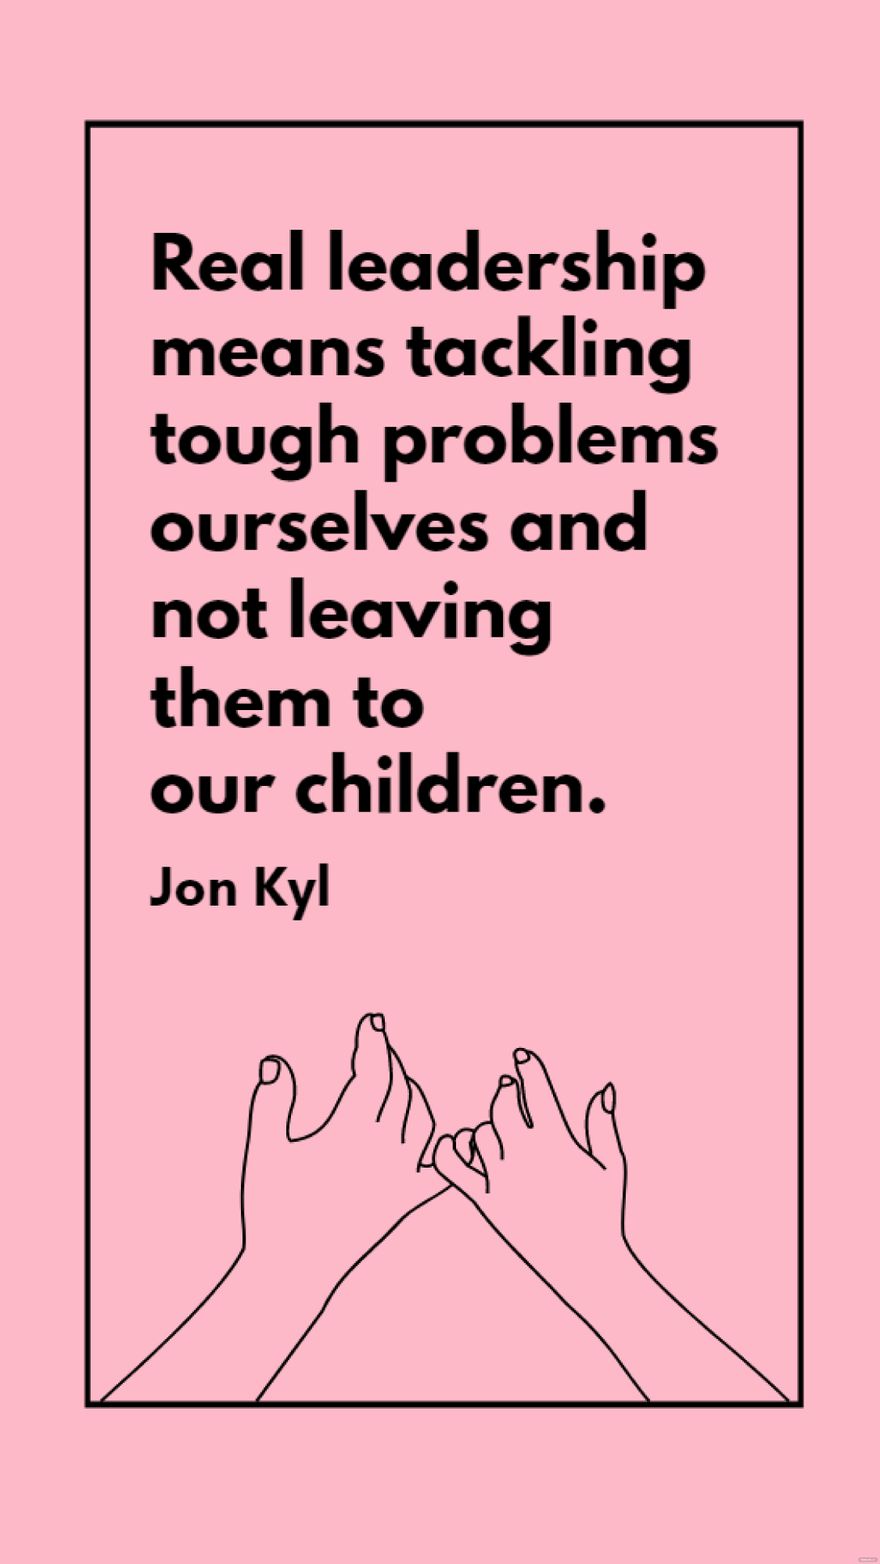 Jon Kyl - Real leadership means tackling tough problems ourselves and not leaving them to our children.